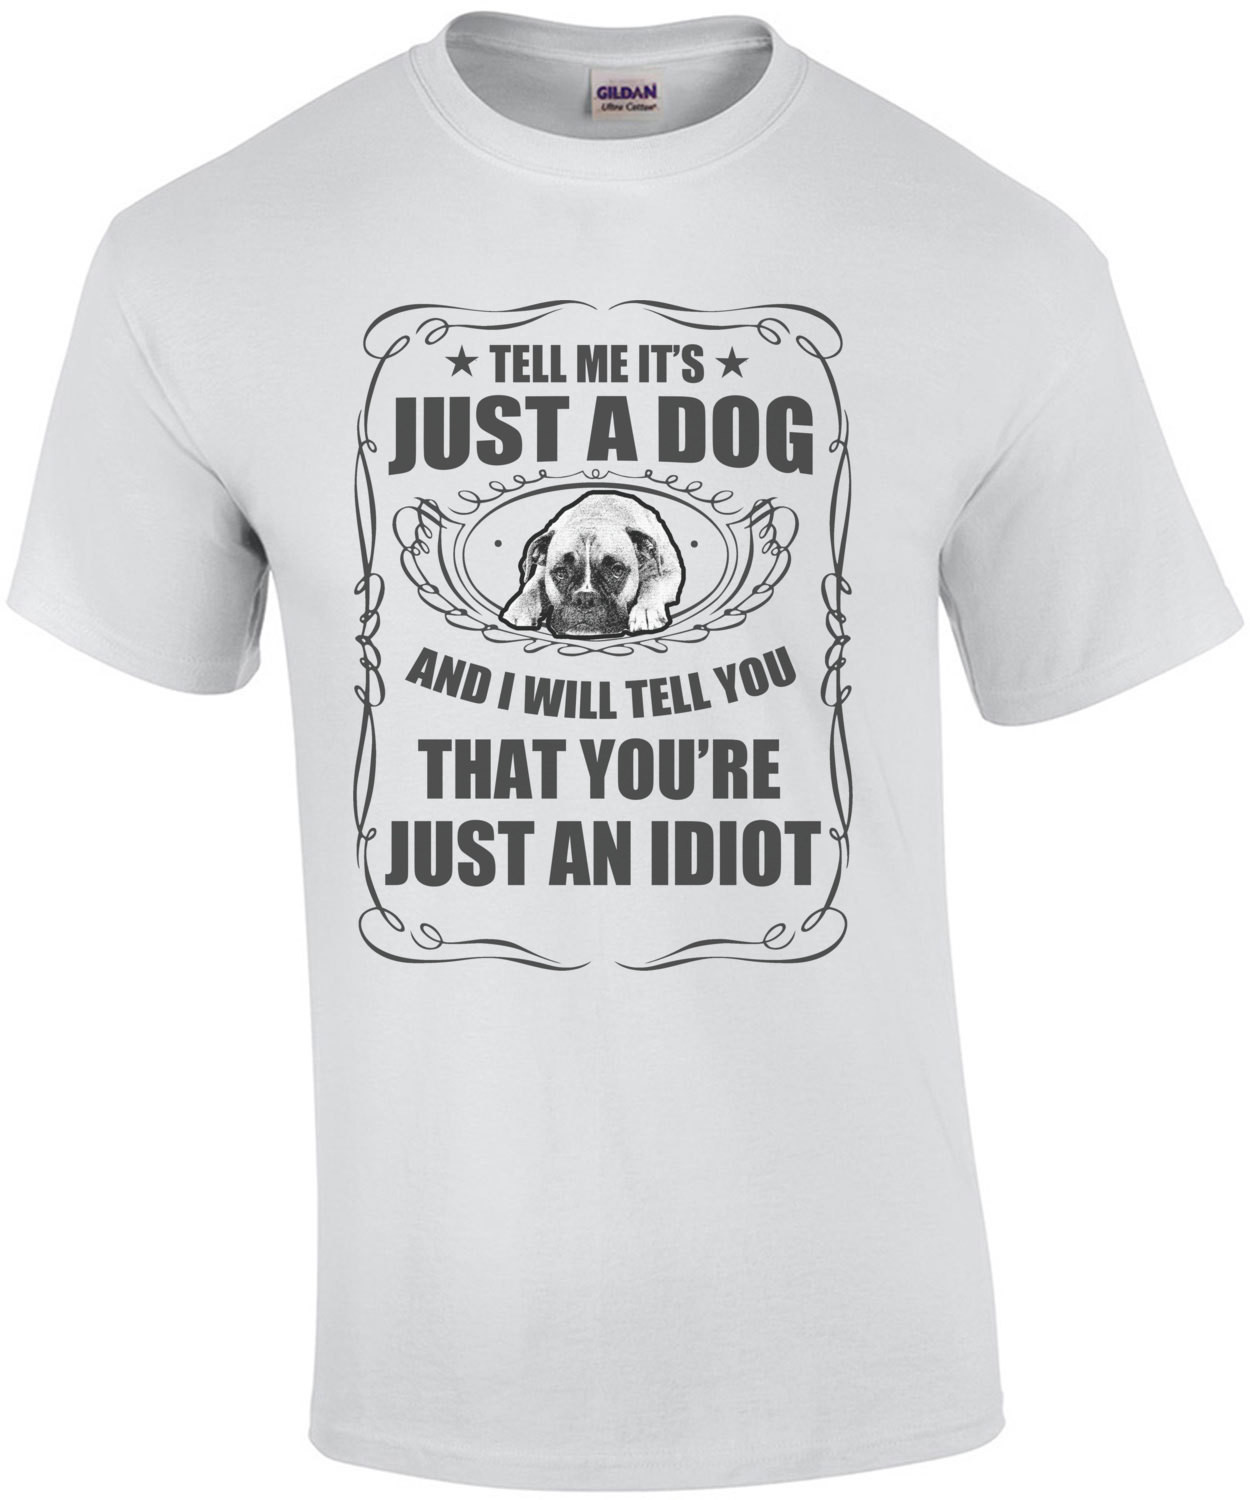 Tell Me It's Just A Dog And I Will Tell You You're Just An Idiot T-Shirt